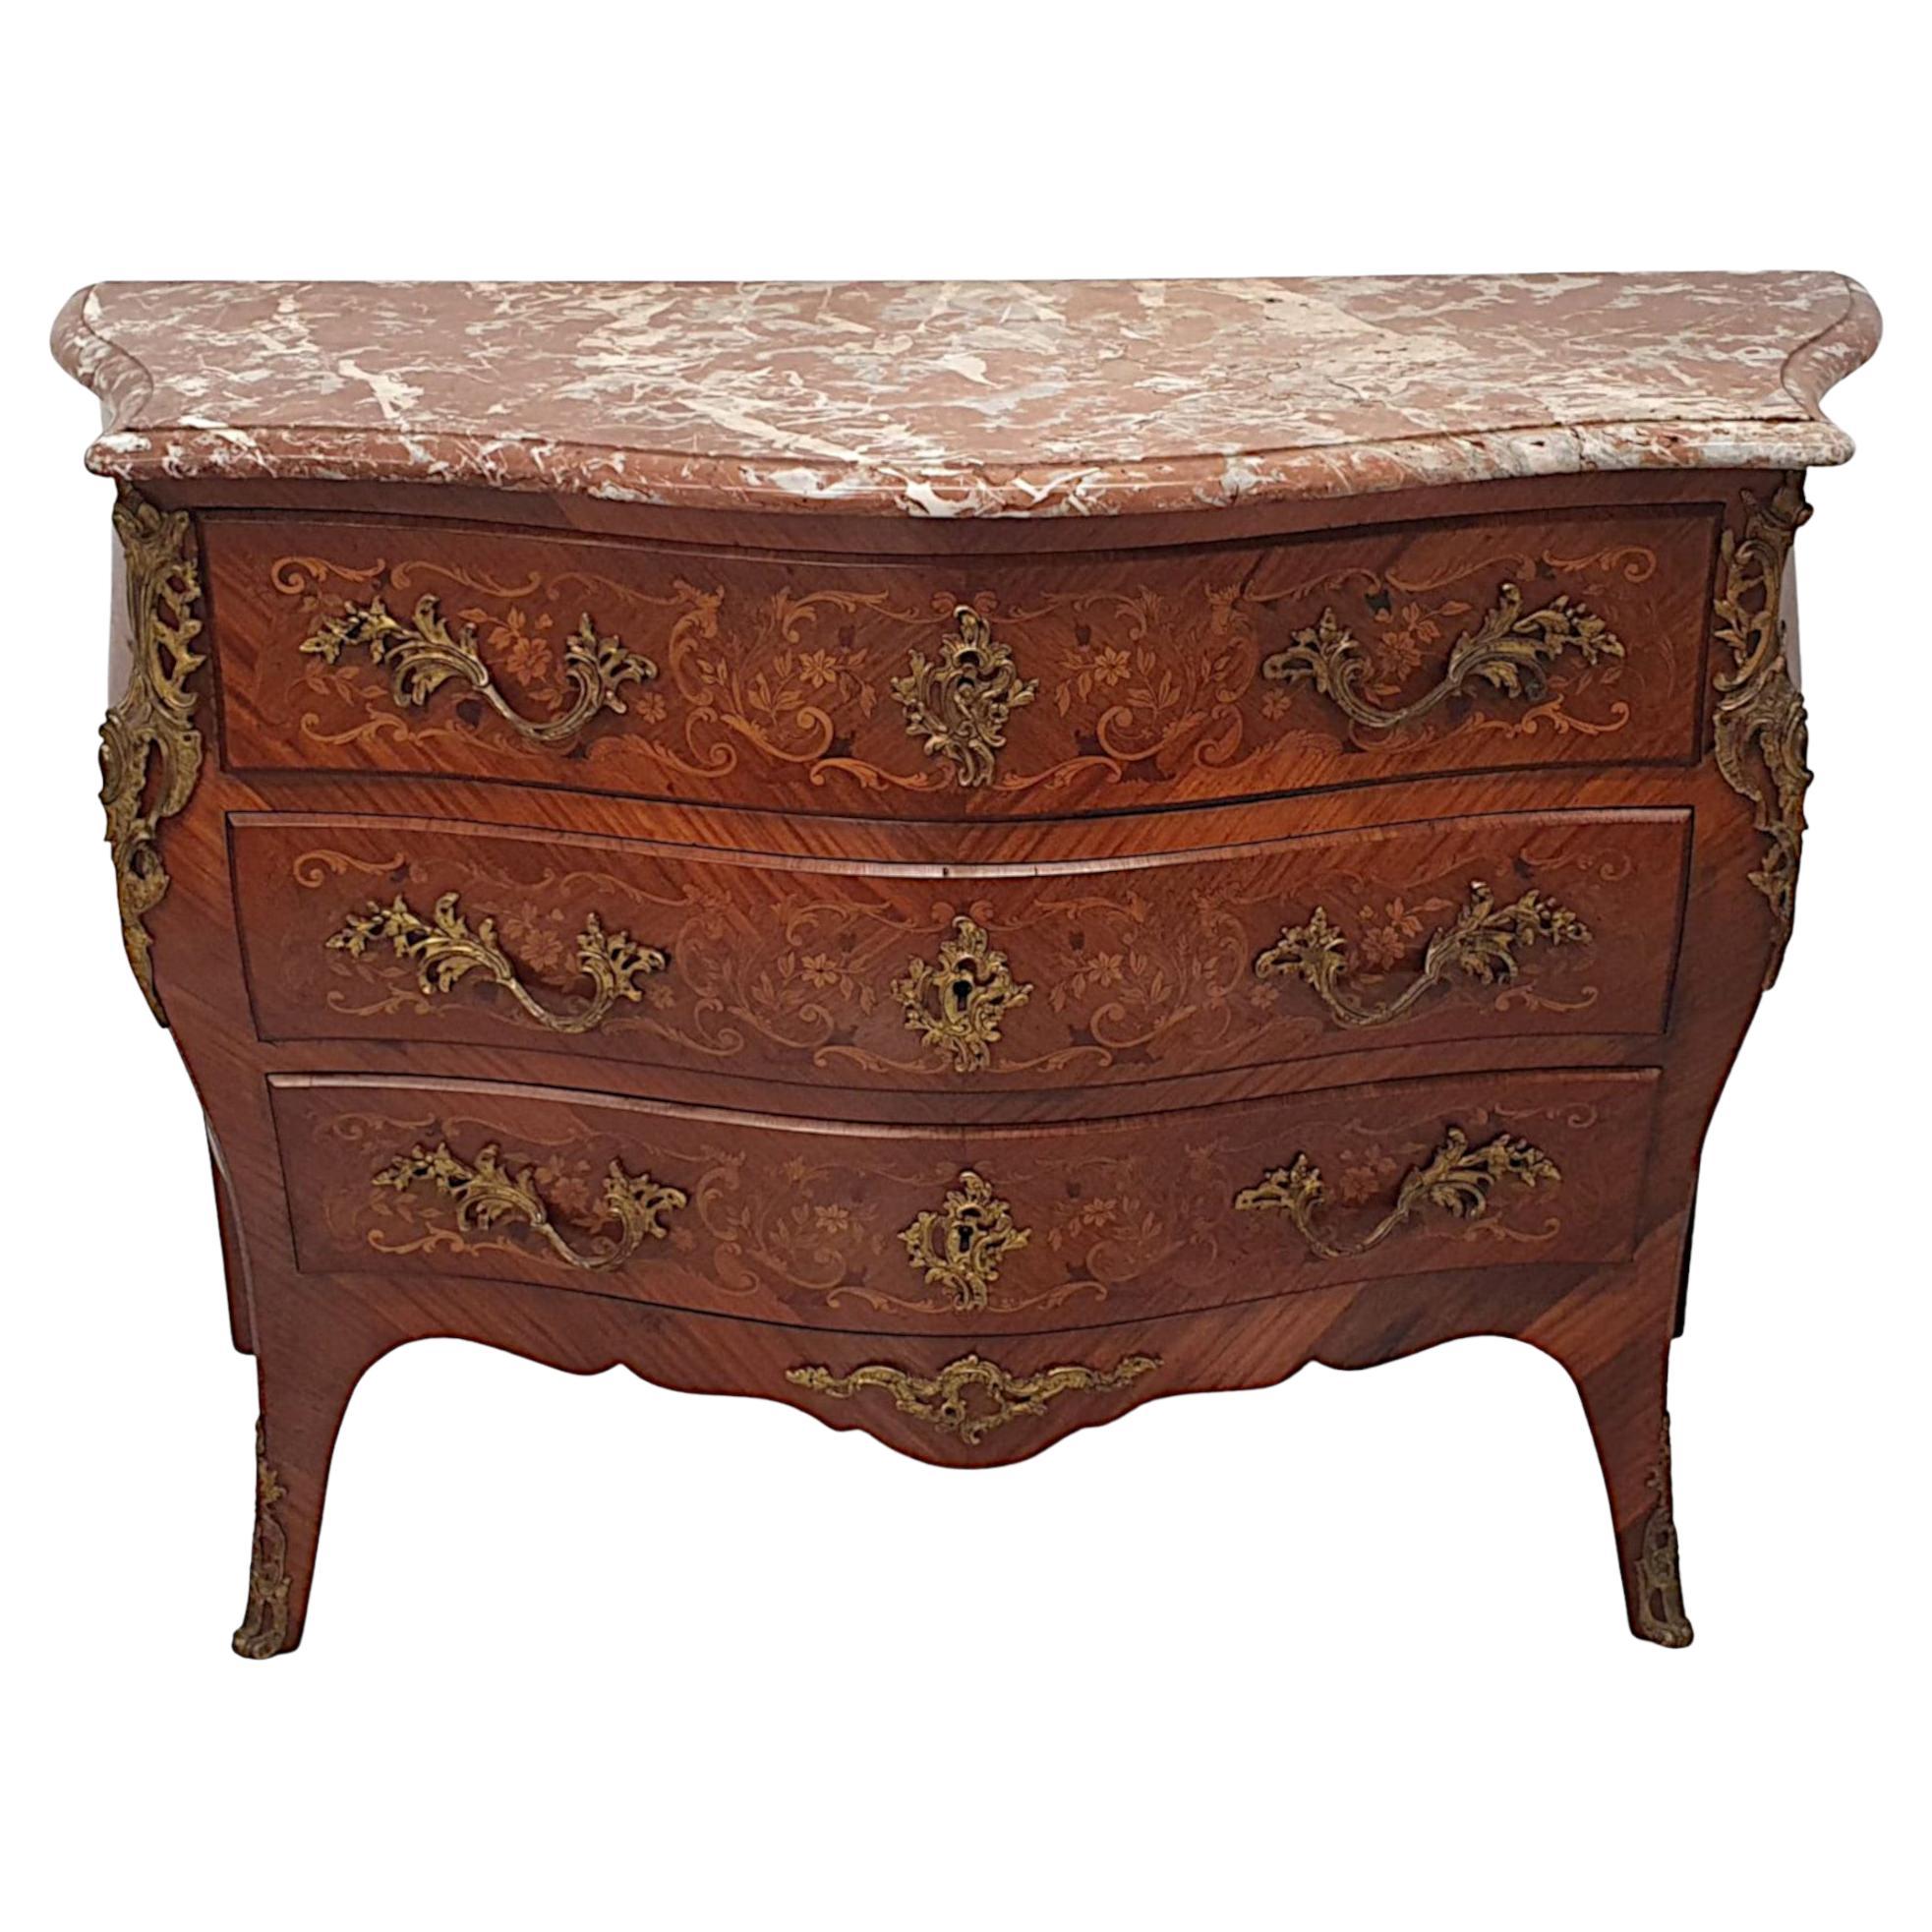 Very Fine 19th Century Marquetry Inlaid Marble Top Chest of Drawers